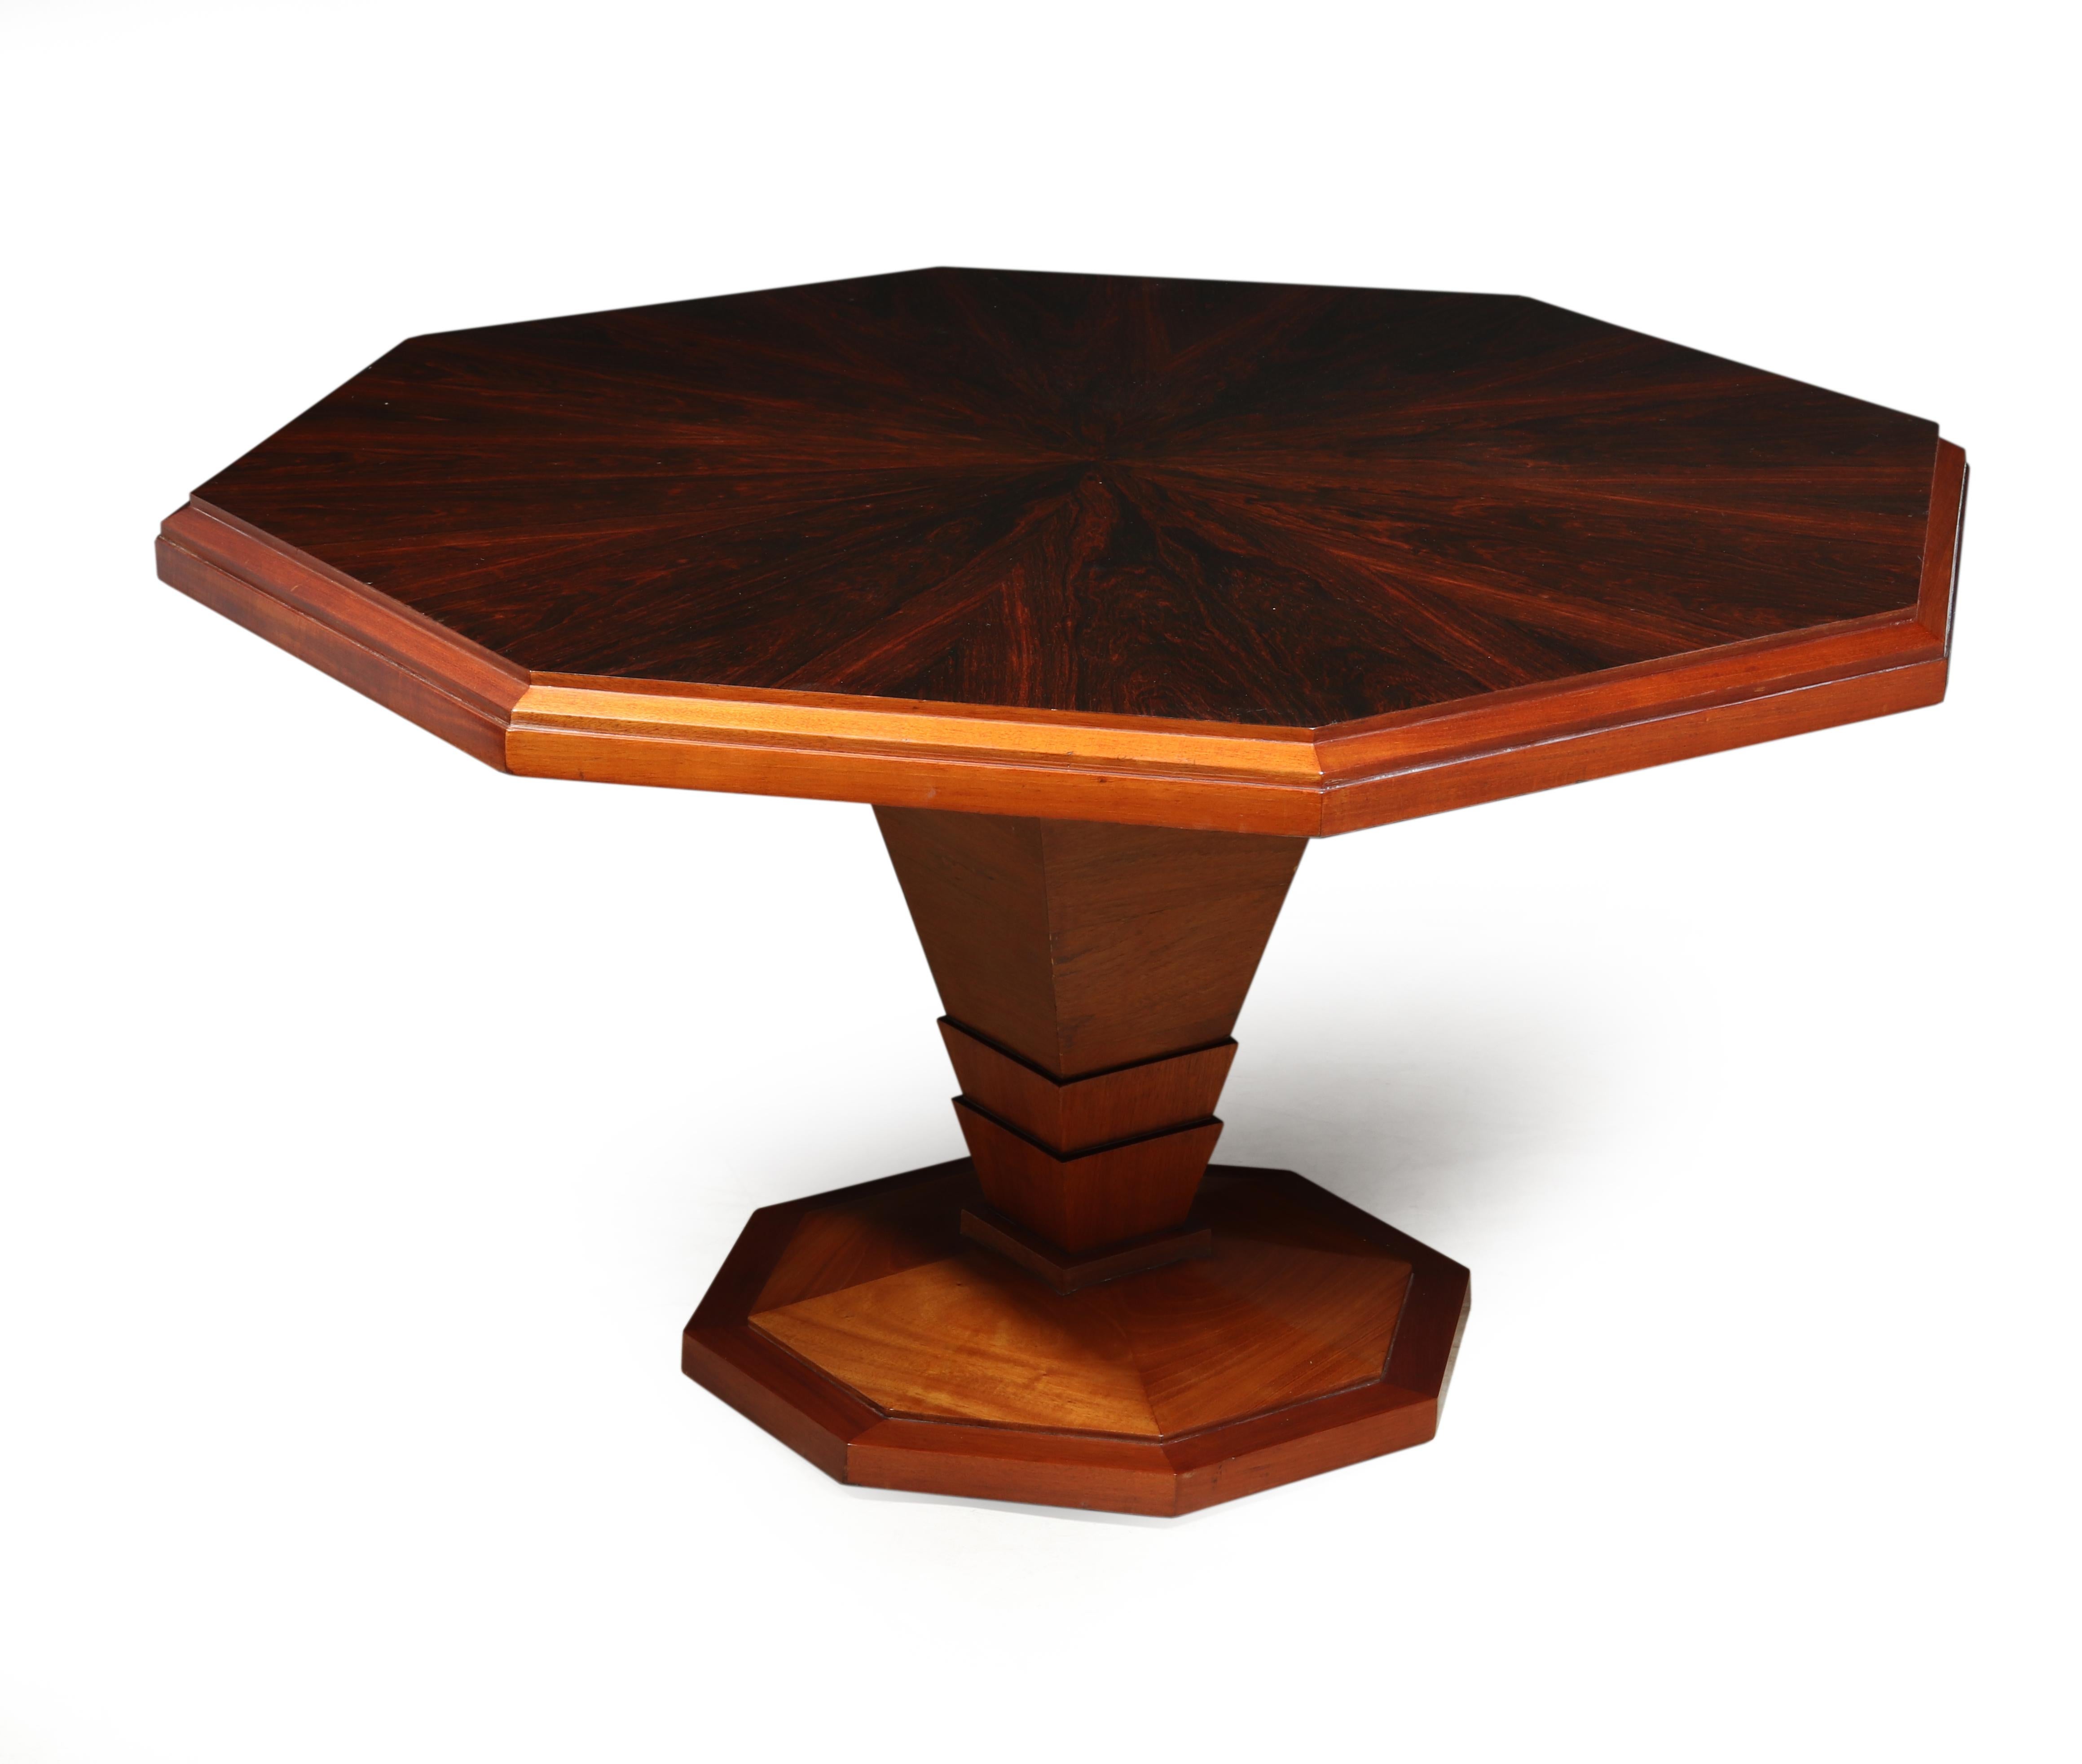 Art Deco coffee table
This coffee table was produced in France in the 1930 from mahogany and rosewood, the table has and octagonal top and stands on a tapered pedestal base, it has been fully polished and is in excellent conditioned

Age: